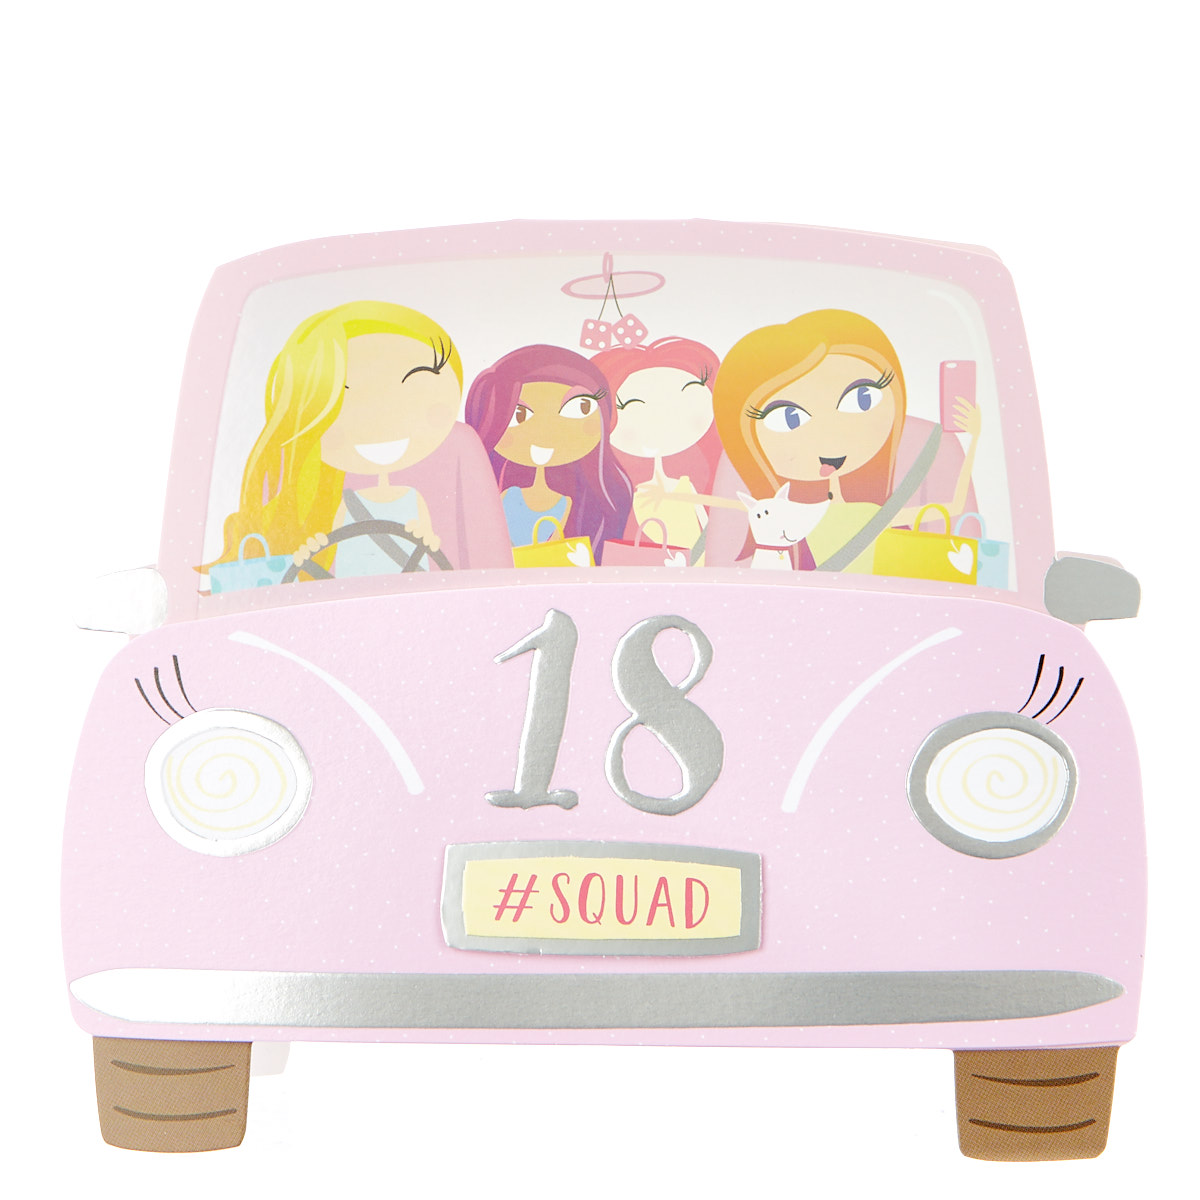 Boutique Collection 18th Birthday Card - Pink Car #SQUAD